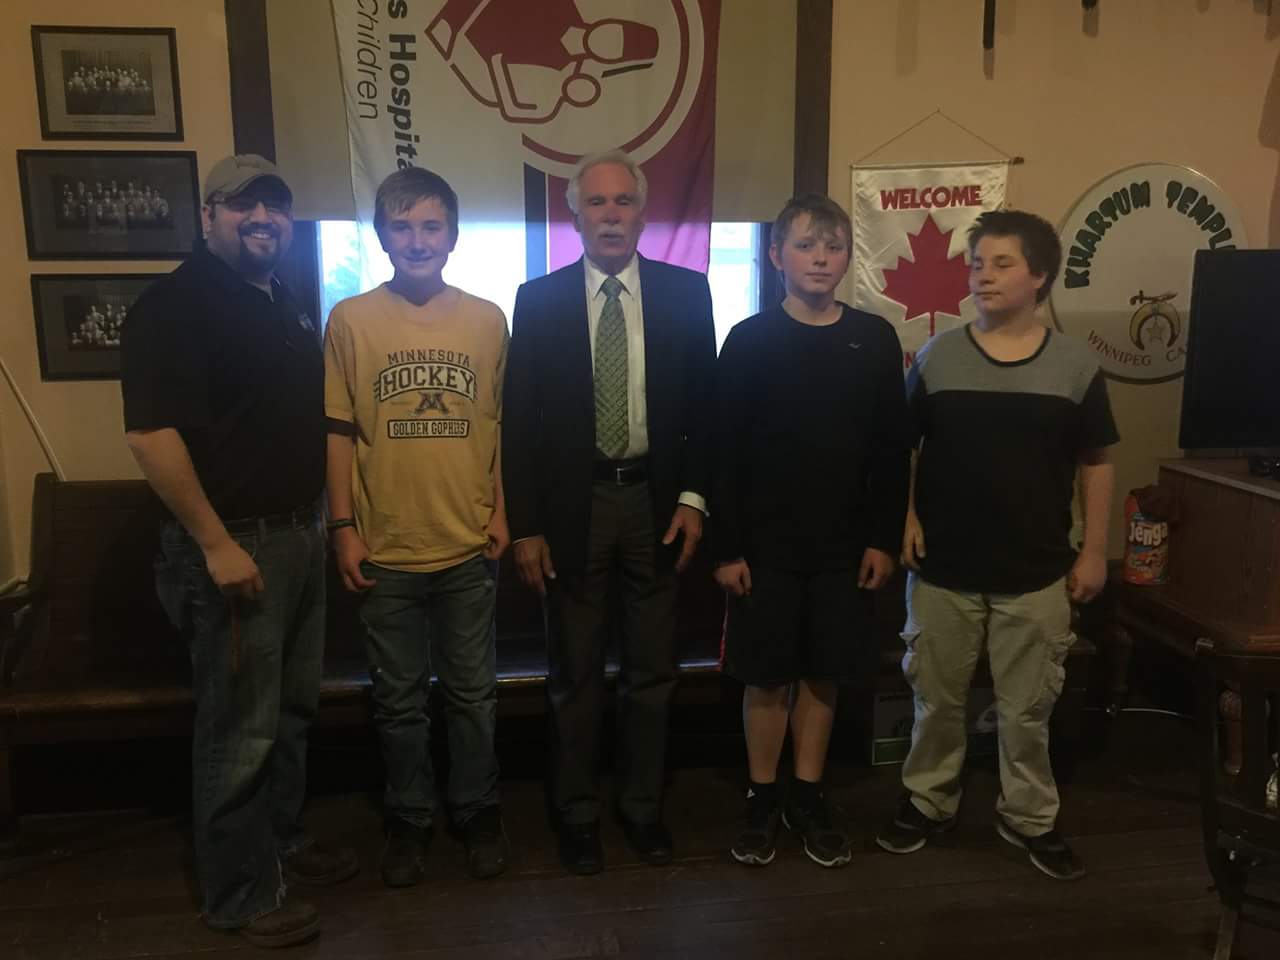 Ivanhoe Chapter DeMolay and Chapter Dad with Sr DeMolay, Ed Schafer, former US Sec of Agriculture, former Governor of ND, and interim President of UND.